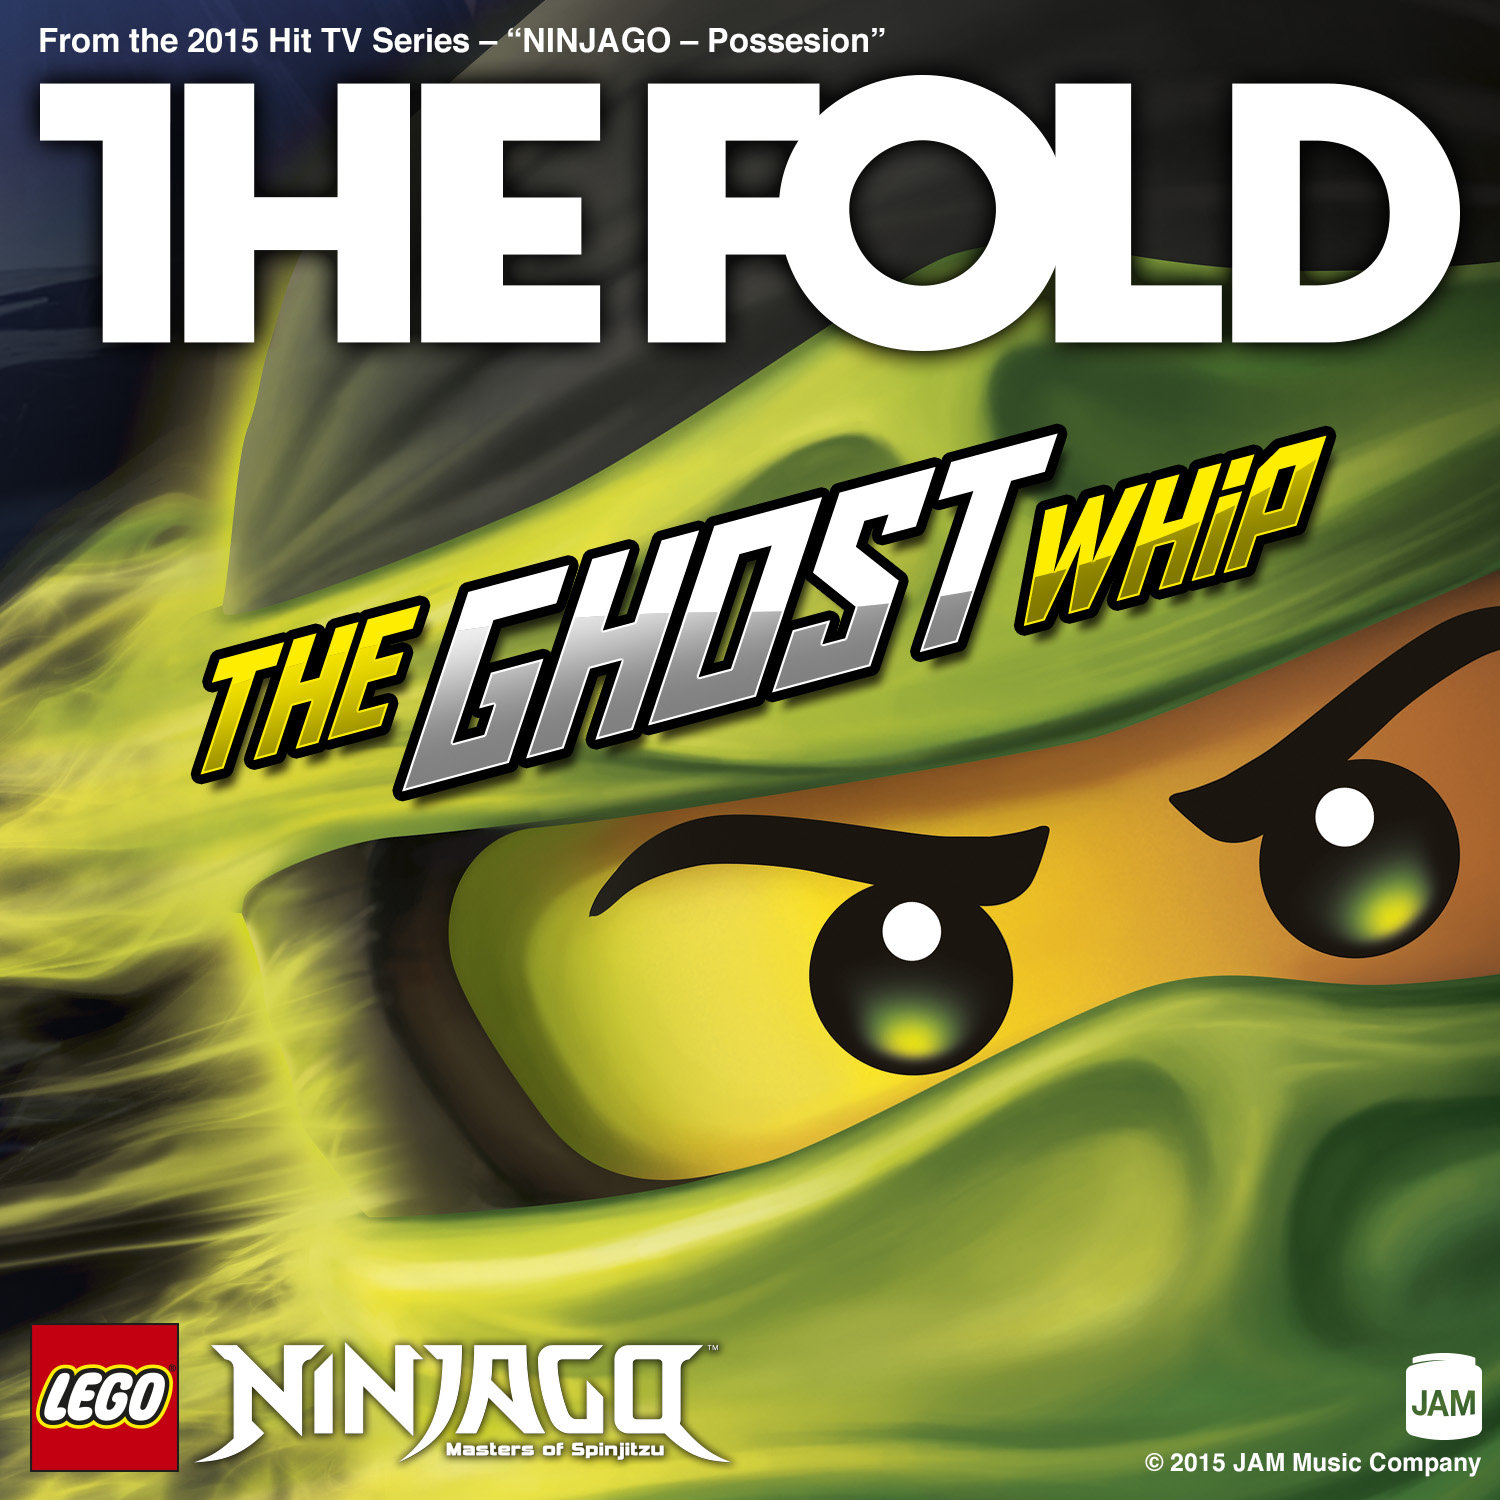 Ninjago the weekend whip. The Fold Ghost Whip. The Fold weekend Whip.